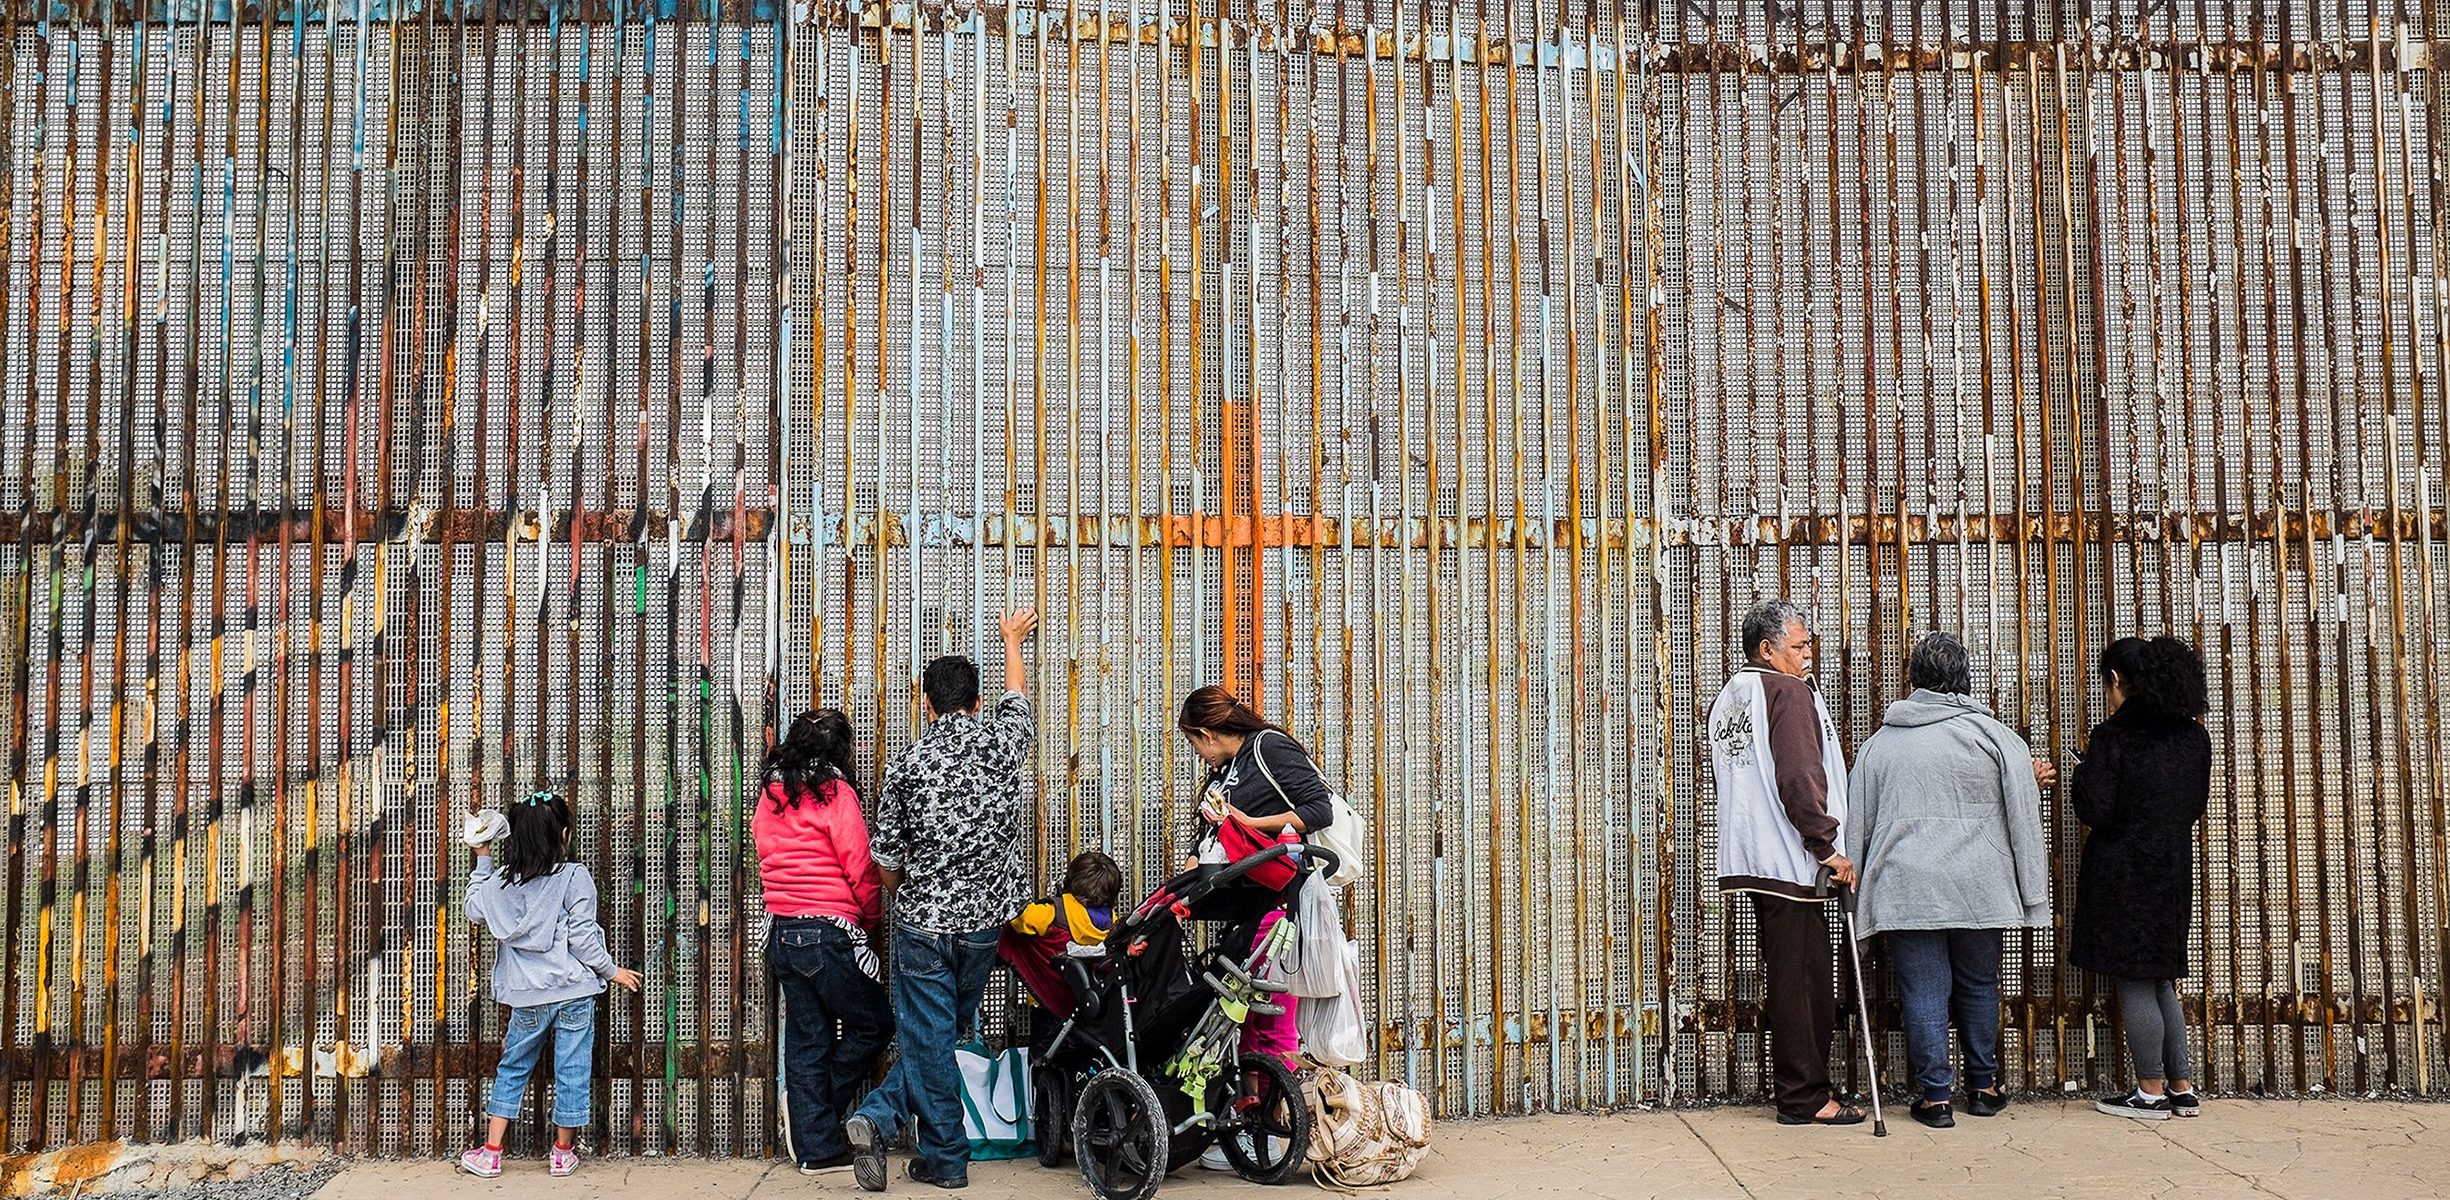 In the foreground, a family of five, with two young girls and a toddler in a stroller, stand facing the border gates in the background. An elderly couple and another adult stand a few feet away also facing the gates.